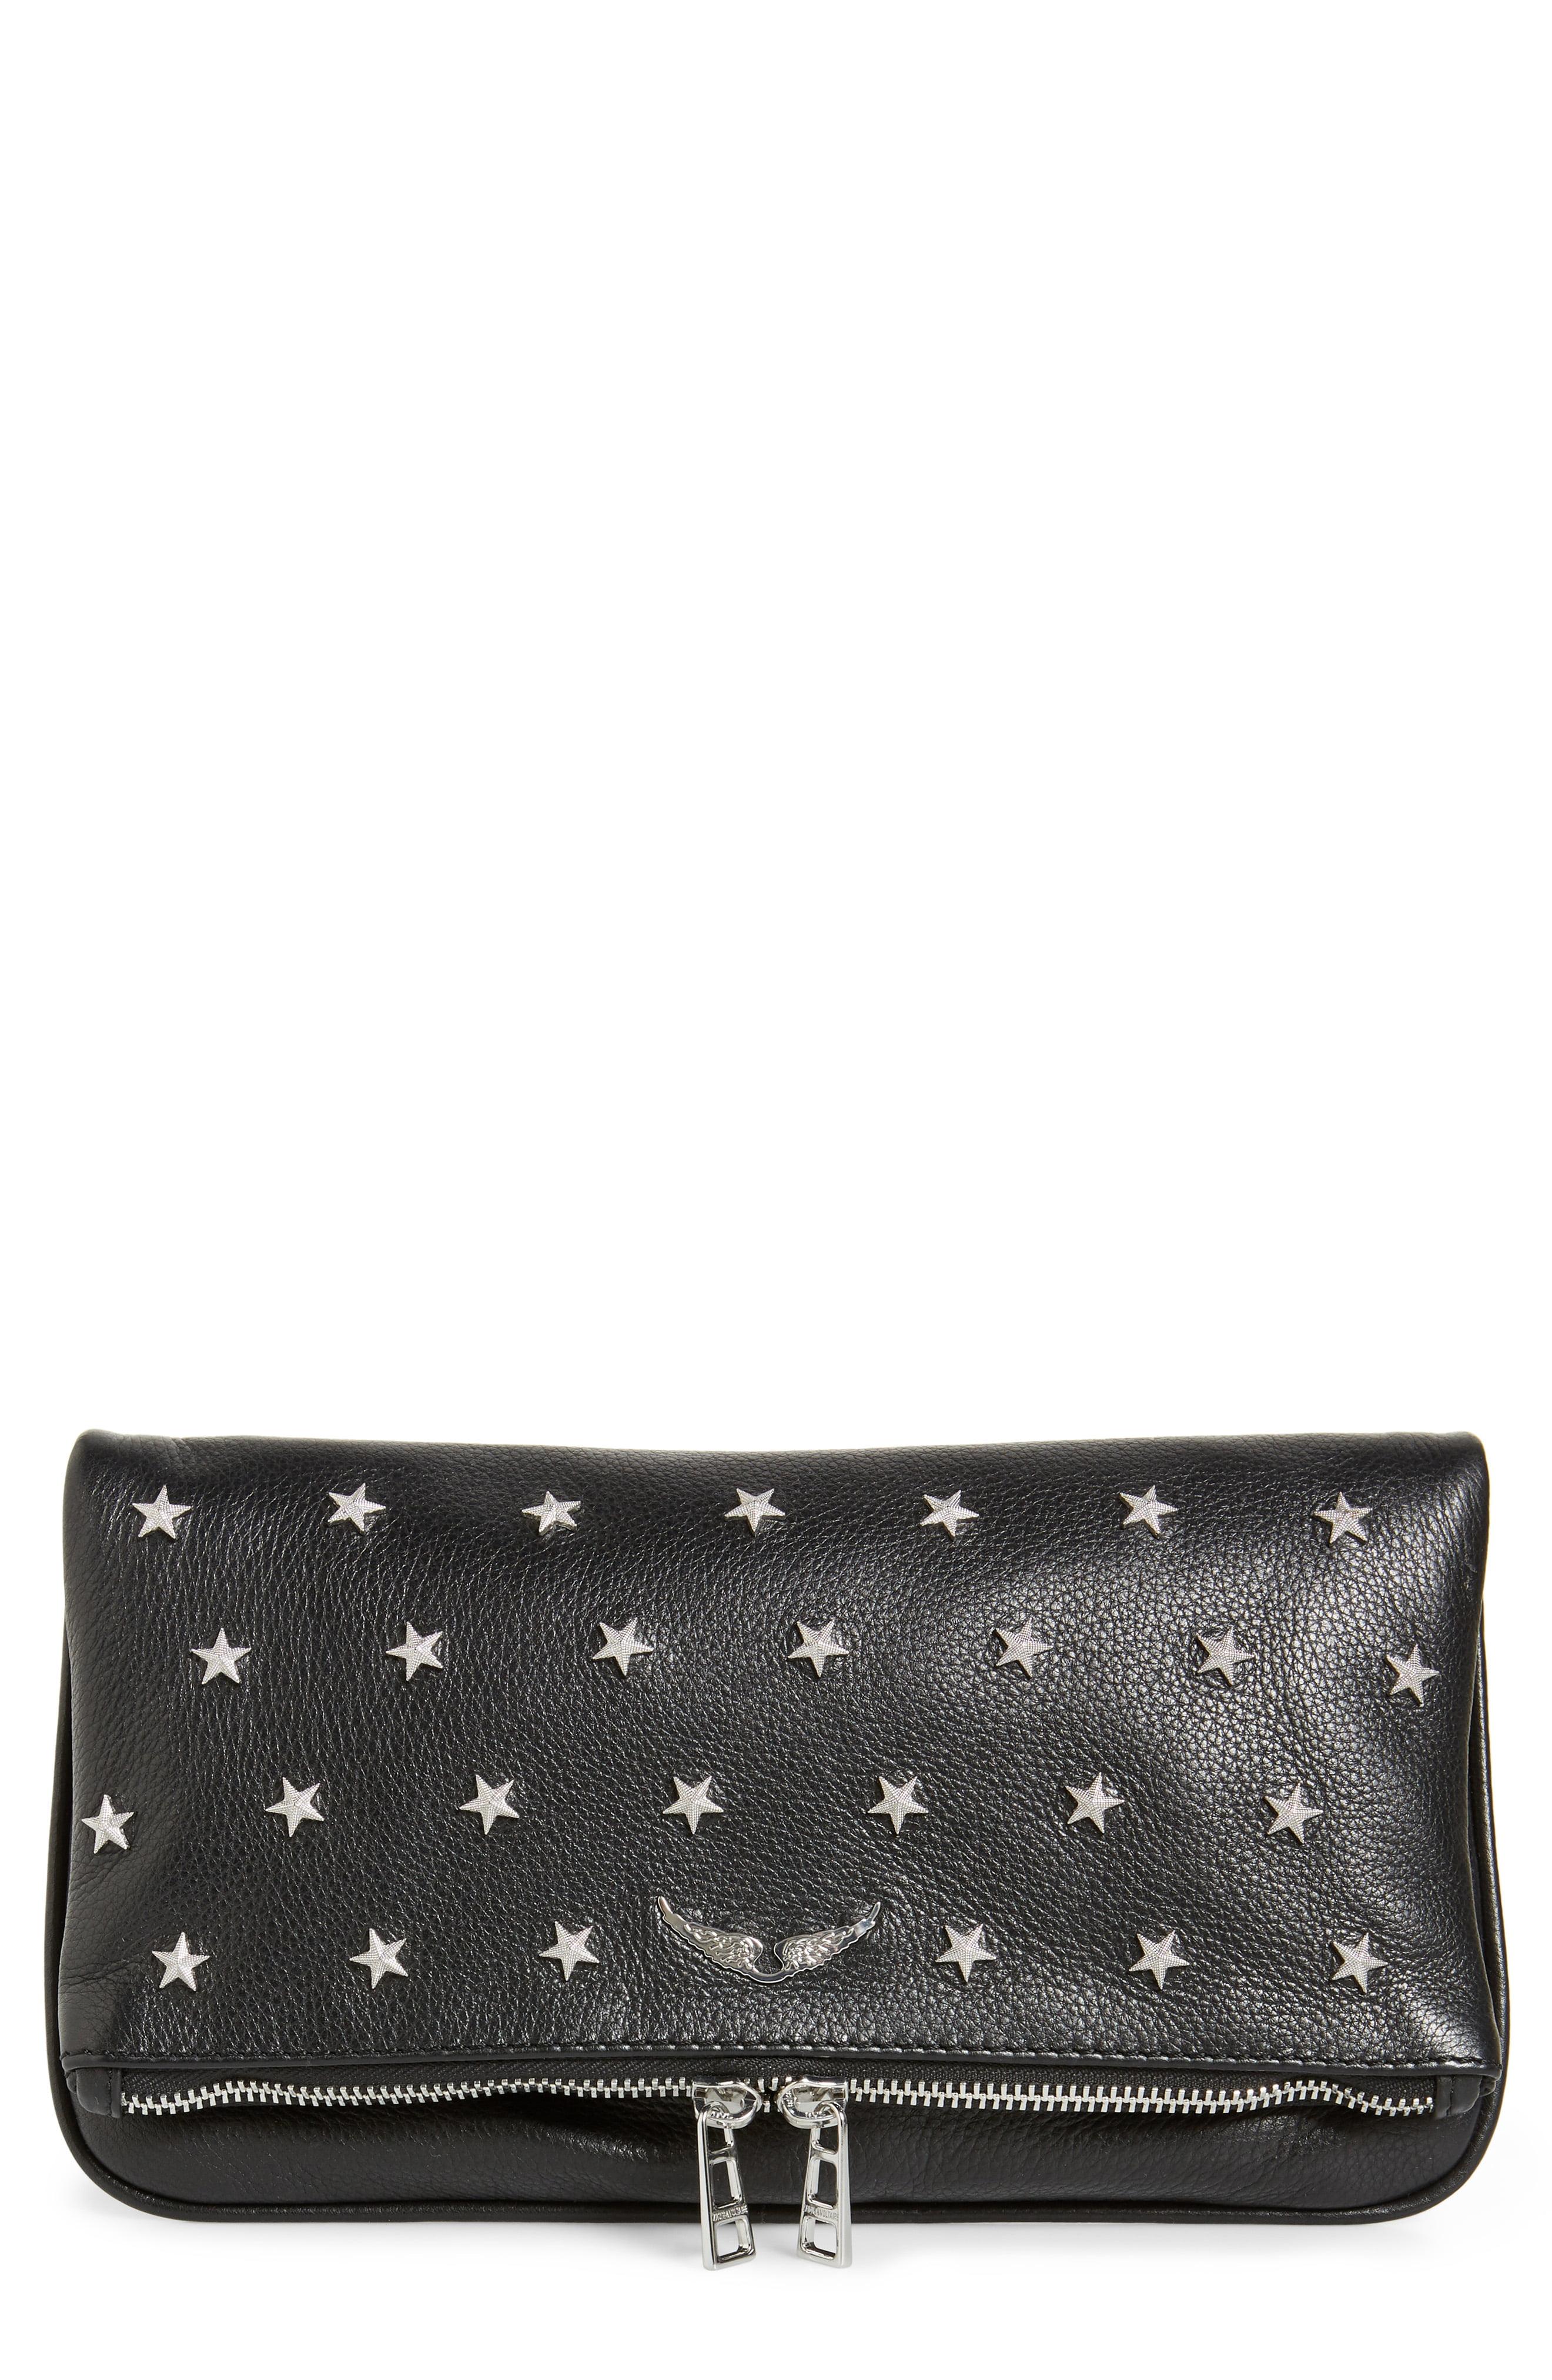 Lyst - Zadig & Voltaire Rock Star Studded Leather Clutch in Black